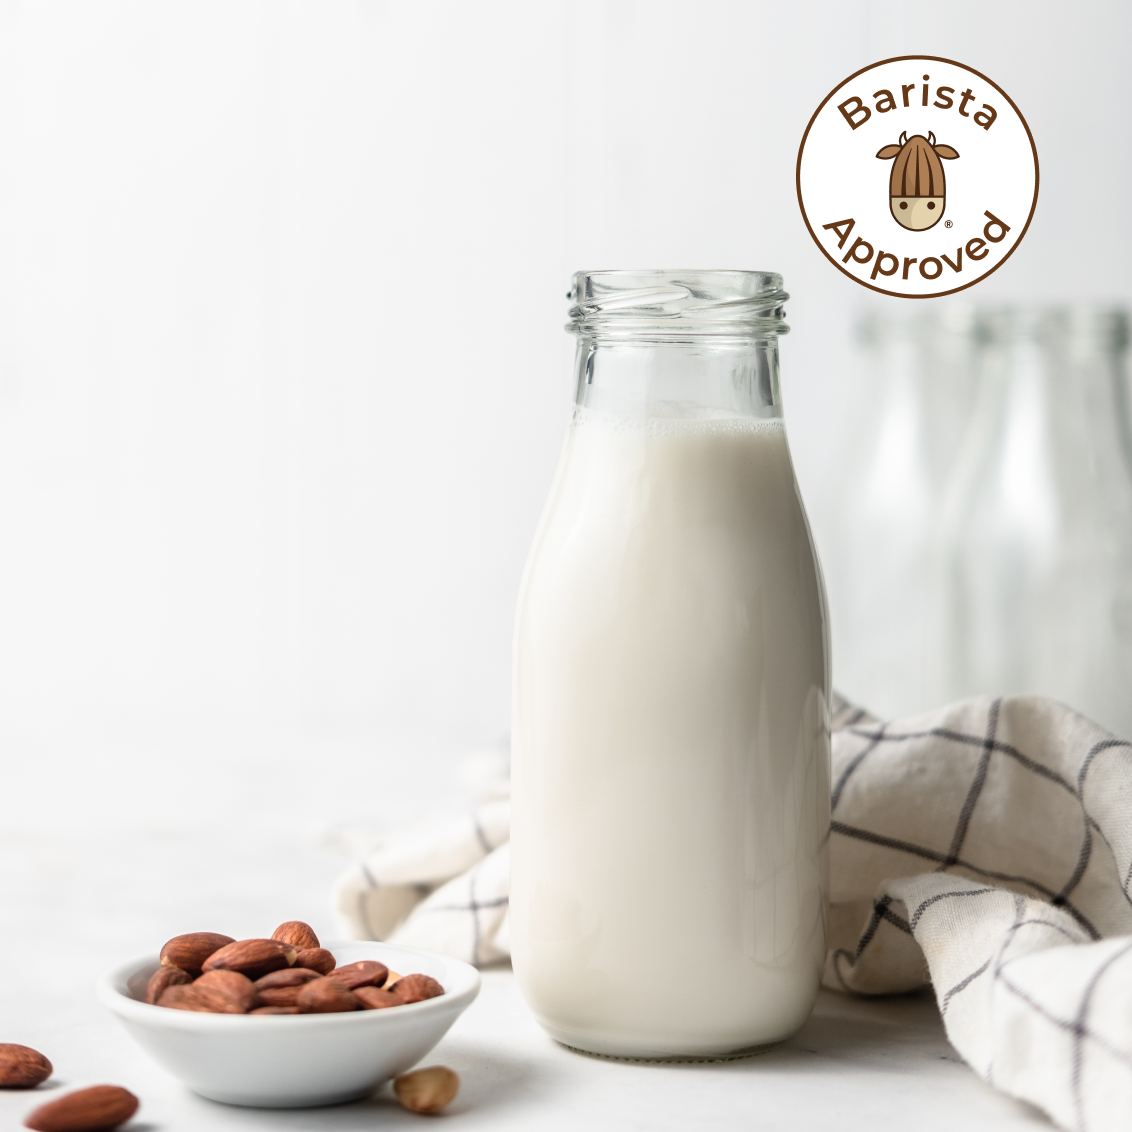 Fresh homemade Pro Almond Milk, presented in a glass jug along with a small bowl of almonds